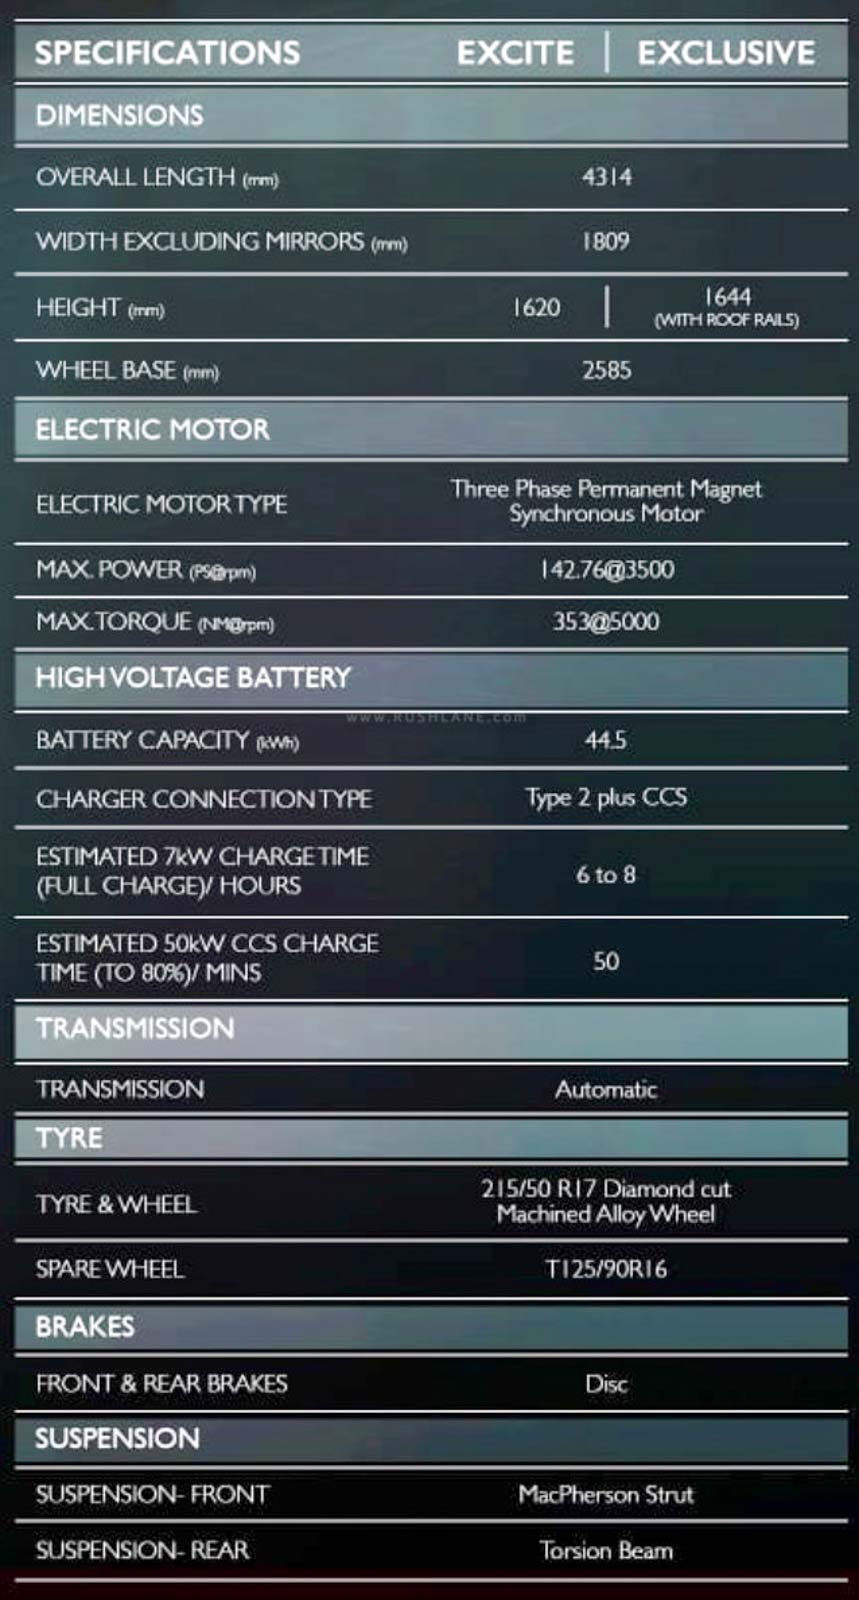 MG ZS electric SUV India - specs